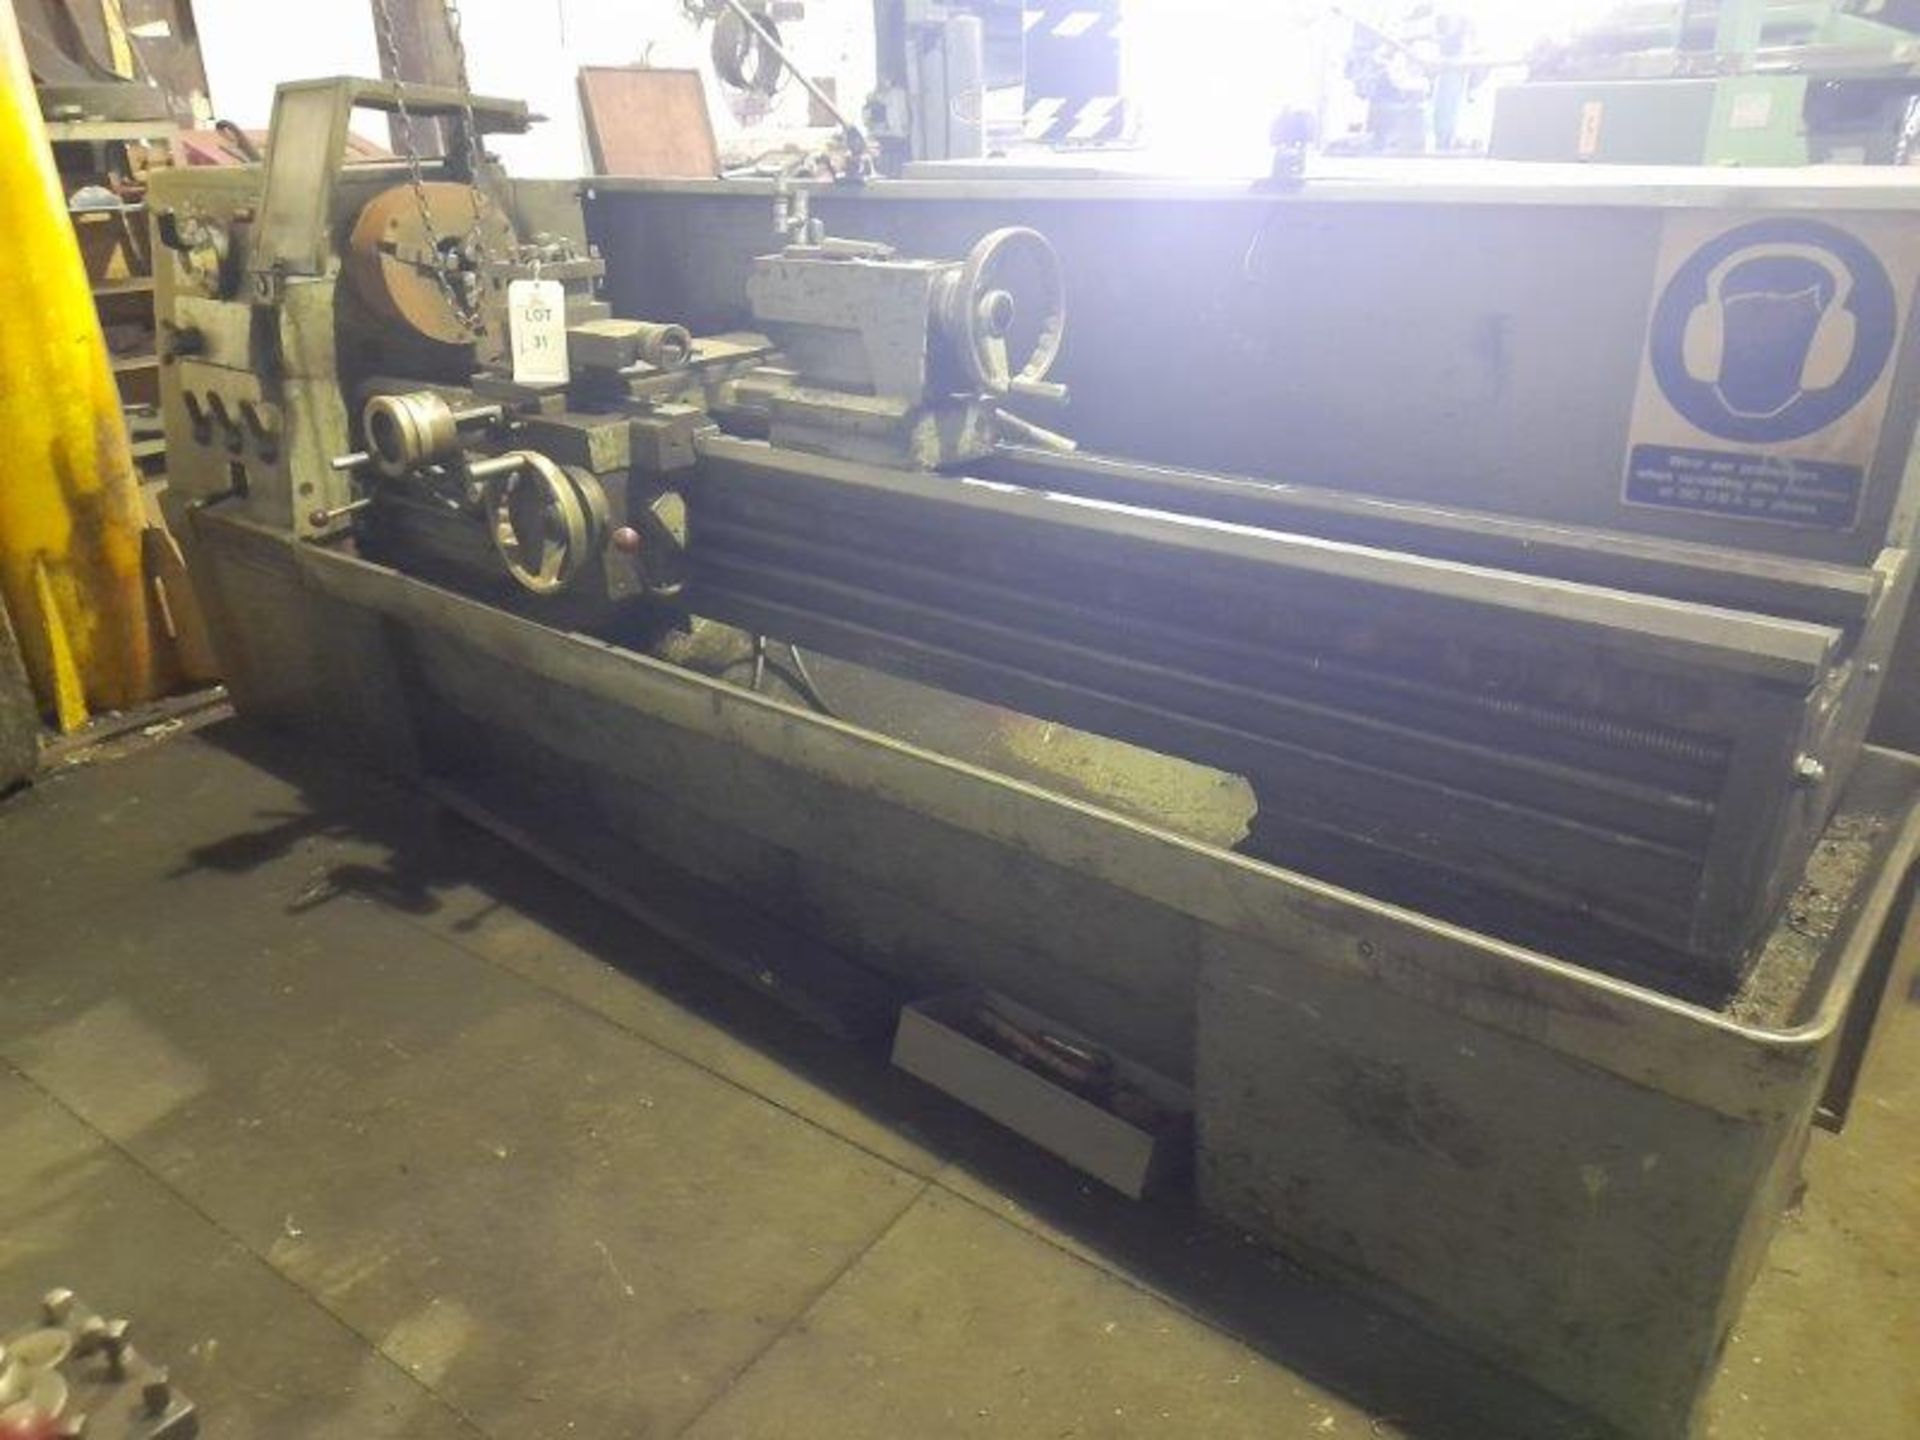 Colchester Mascot 1600 gap bed lathe, Serial No: 7/0005/05243 with 84" between centres, fitted 3 jaw